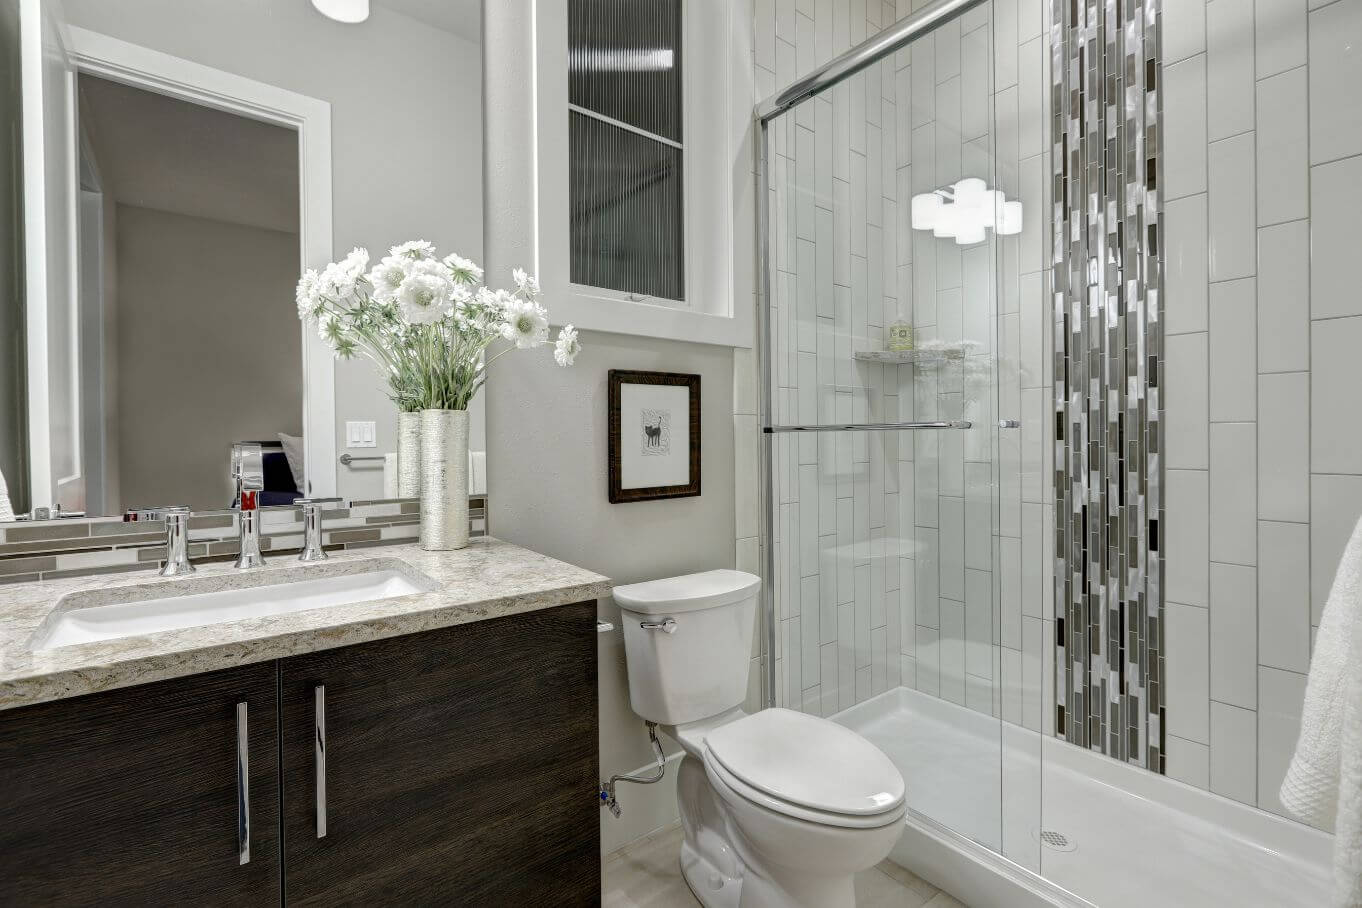 Top Tips To Follow When You’re Updating a Bathroom